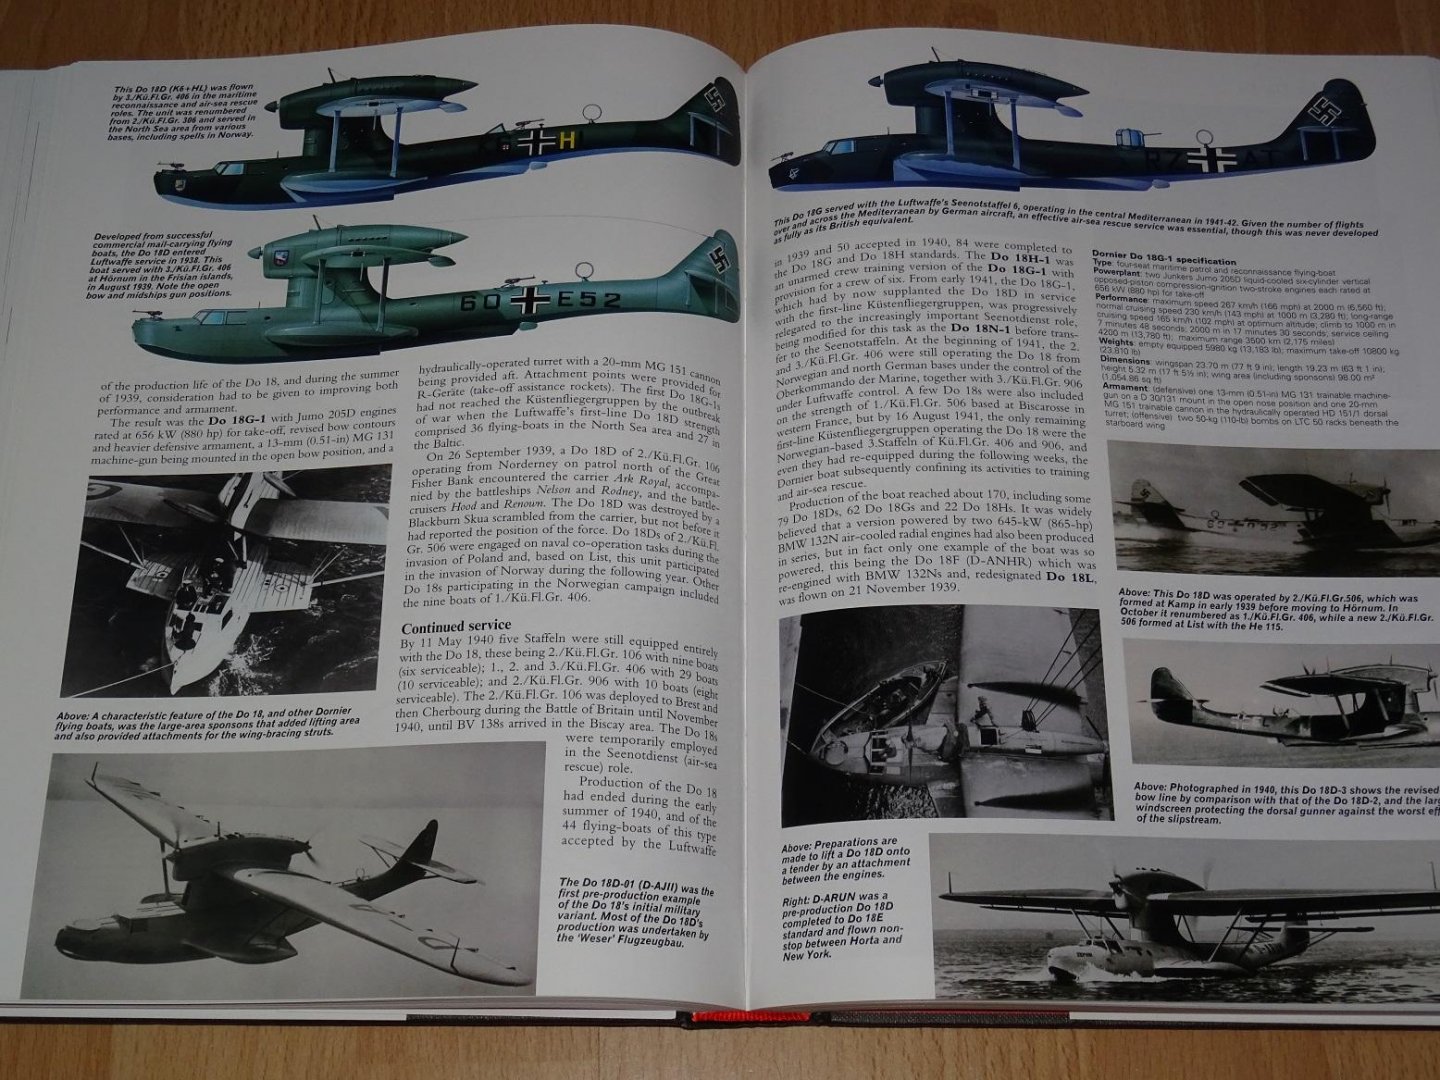 Green, William - Aircraft of the Third Reich volume one : Arado to Focke-Wulf. The complete reference work to the warplanes of Hitler's Luftwaffe